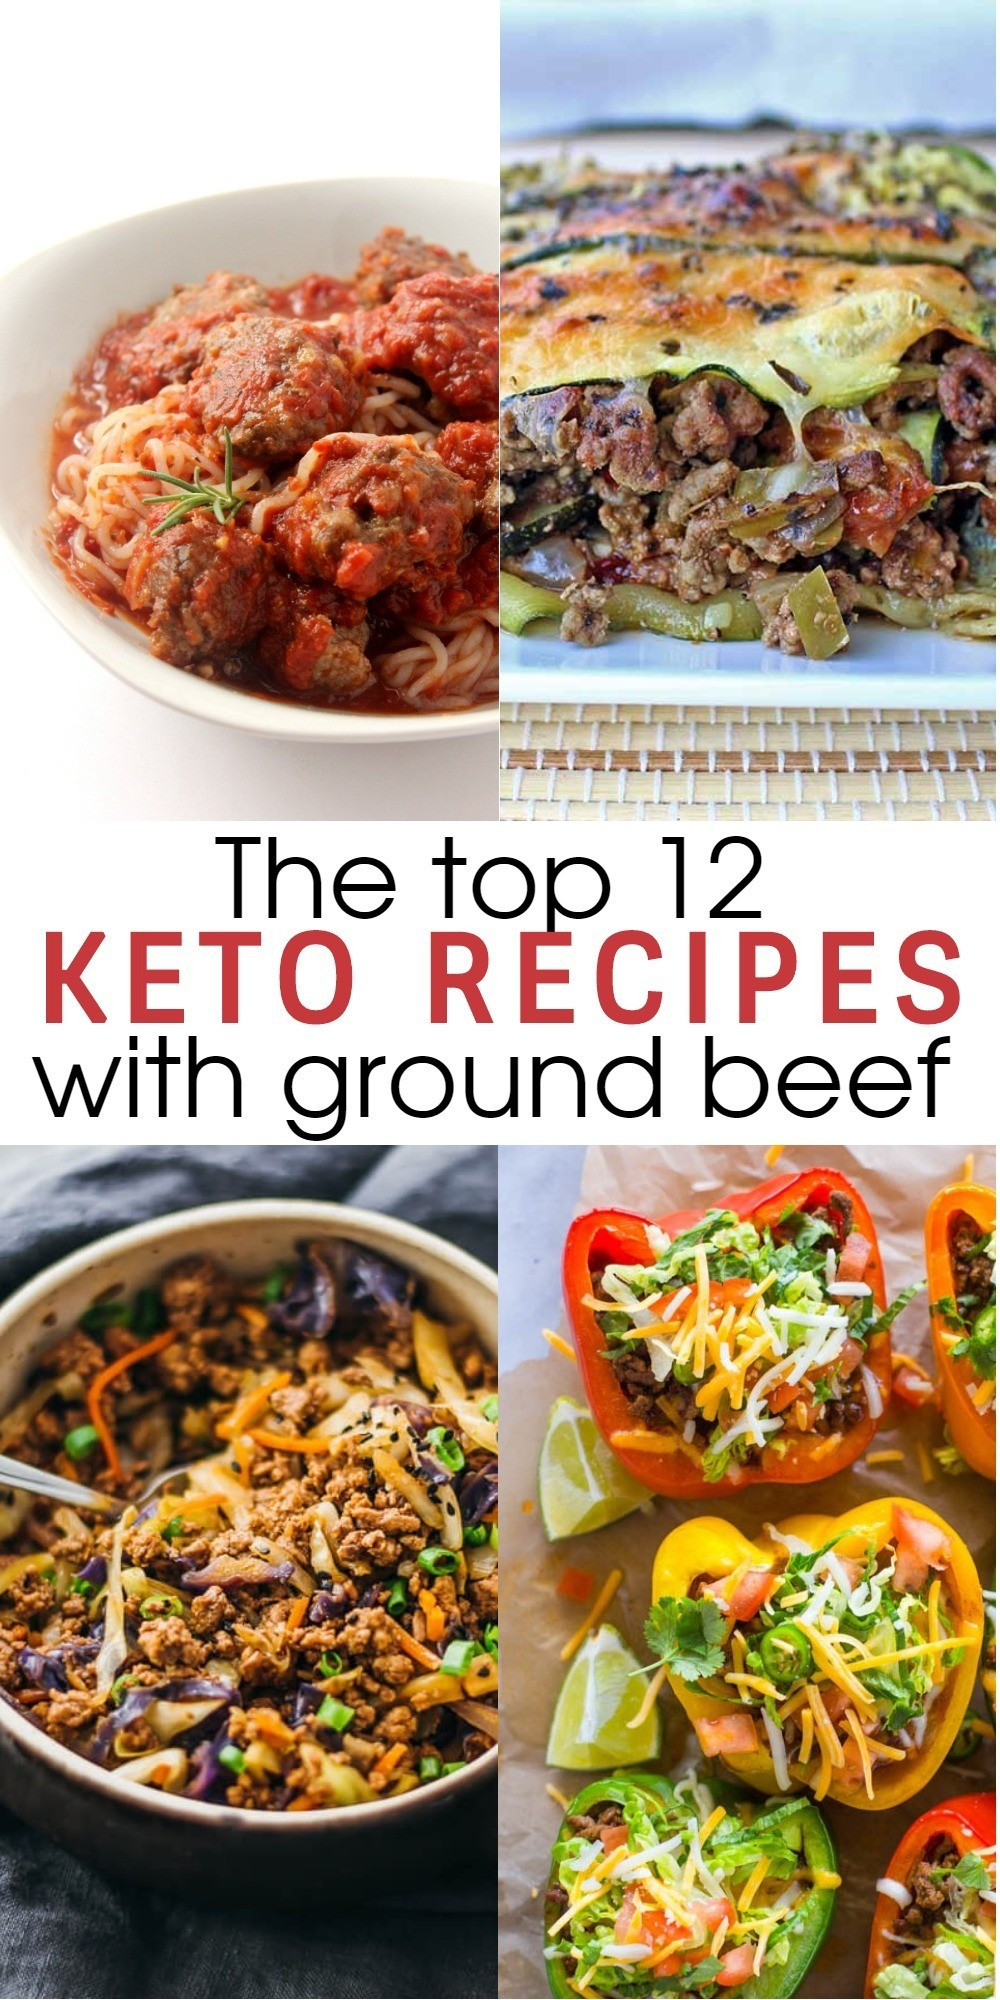 Keto Dinner With Ground Beef
 12 Flavorful and Easy Keto Recipes With Ground Beef To Try